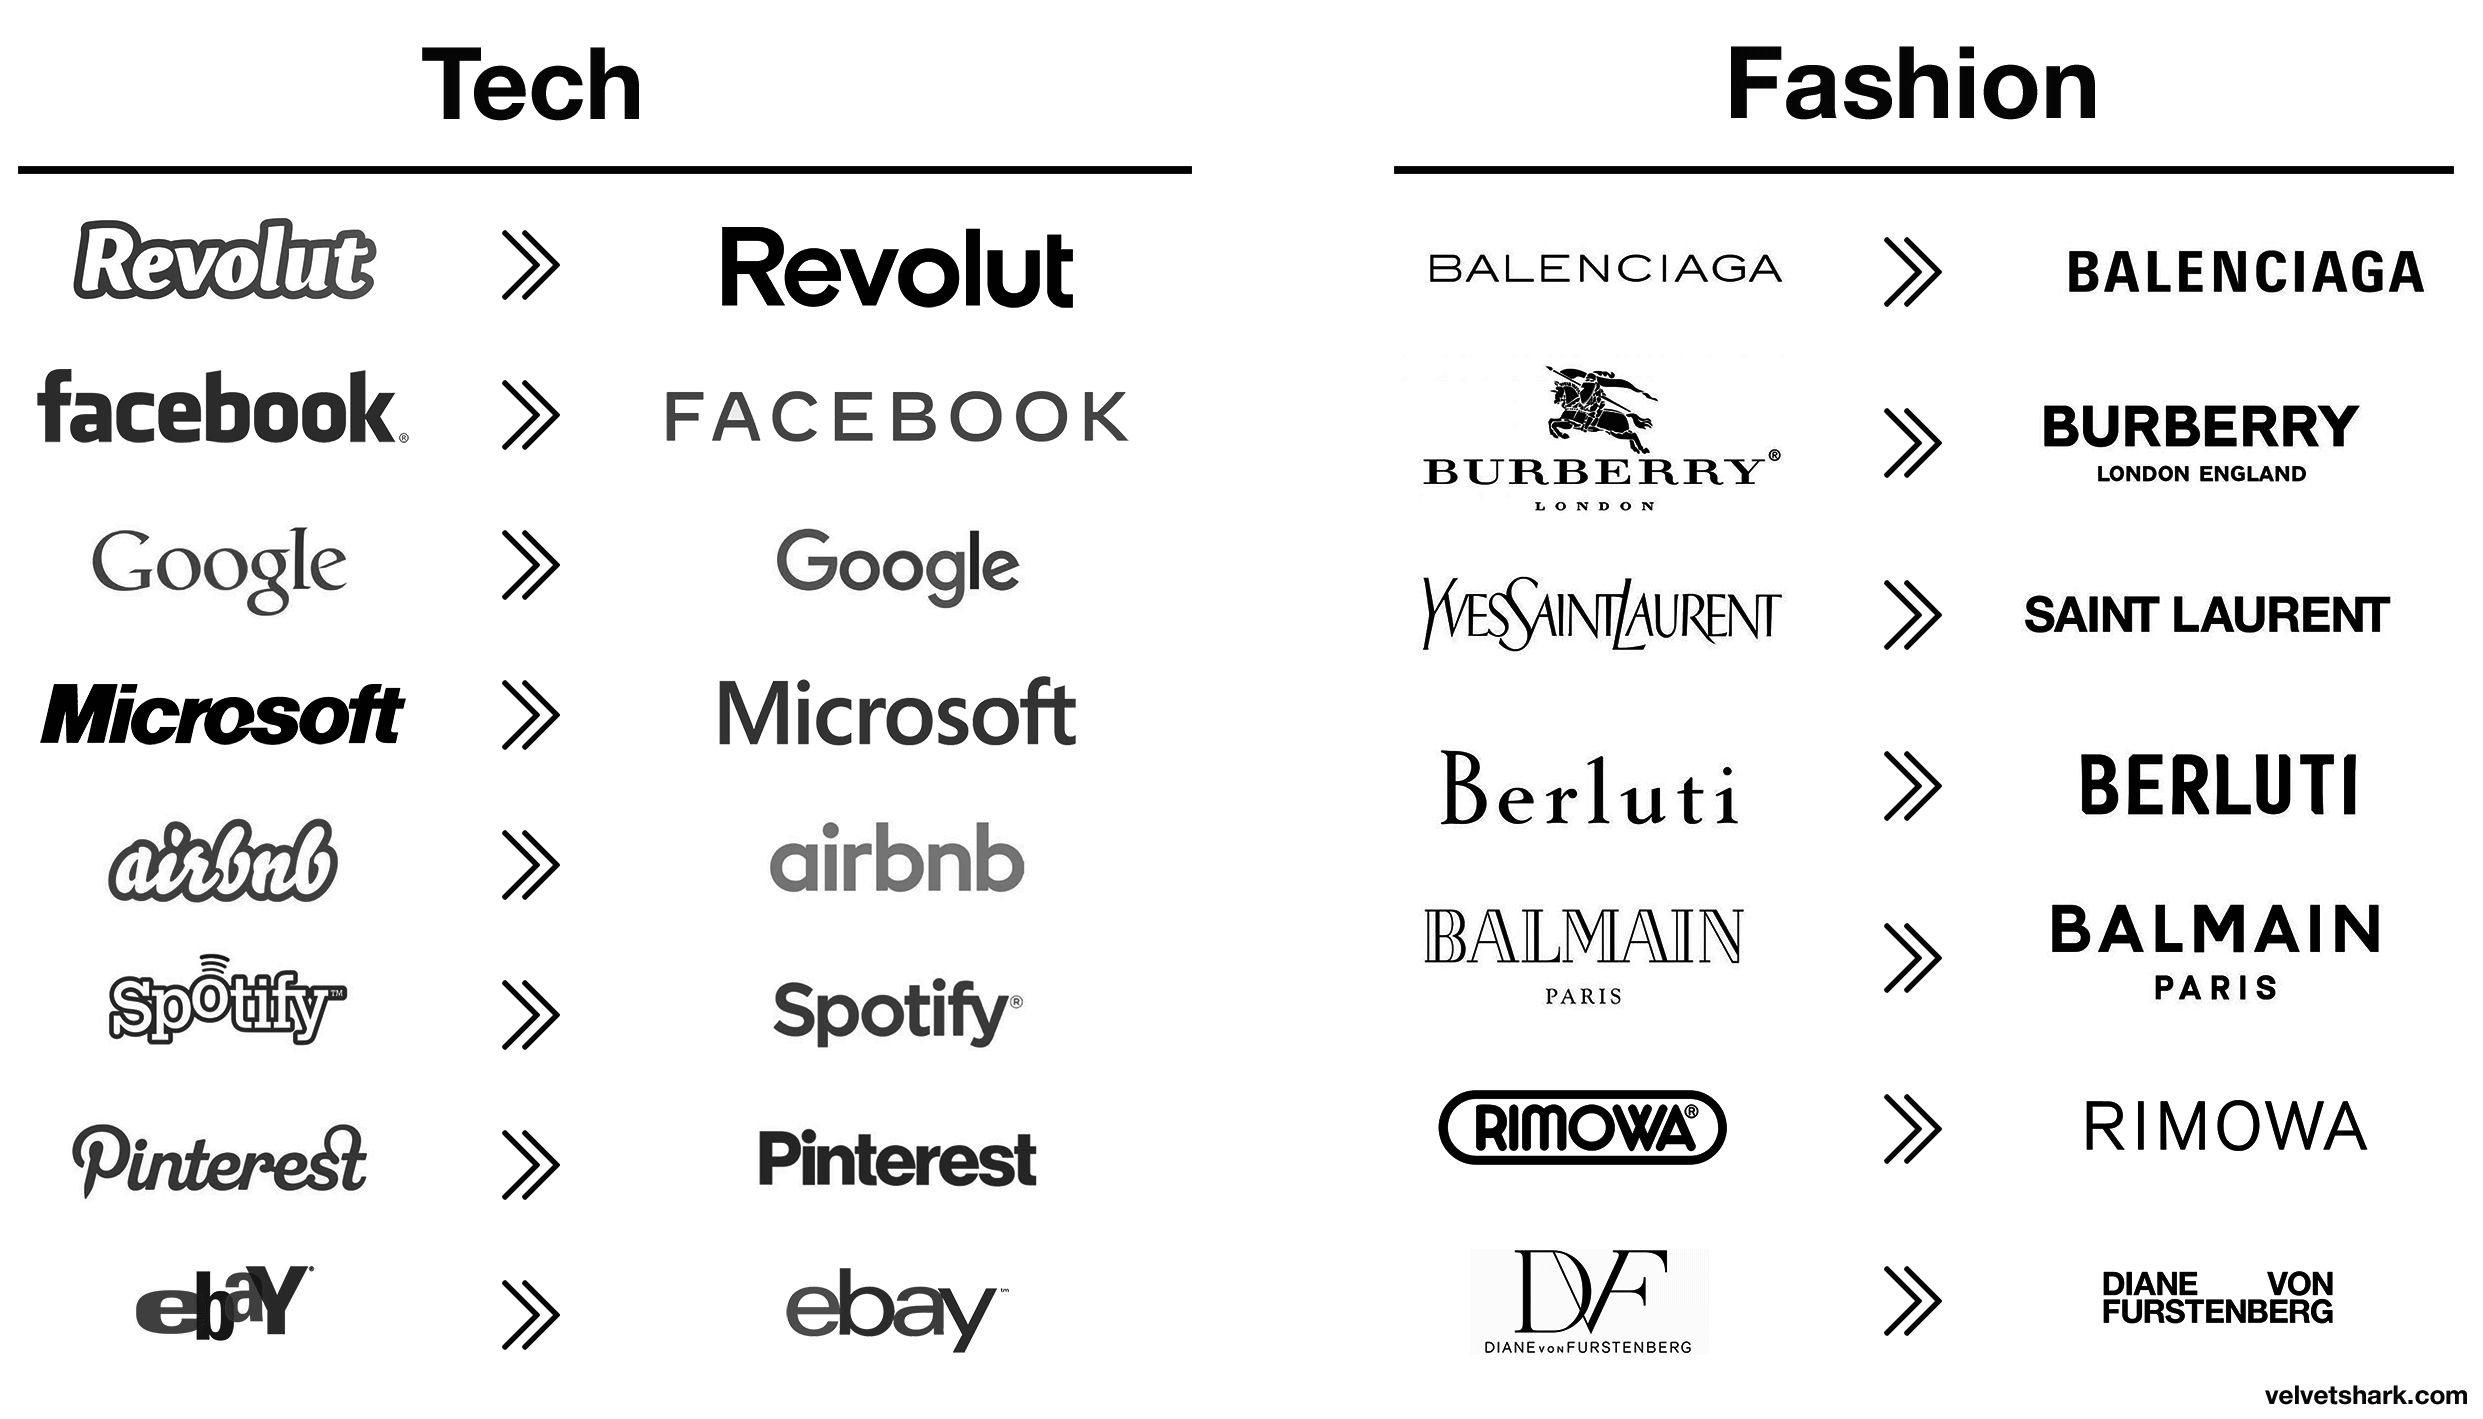 https://www.velvetshark.com/_next/image?url=%2Fimages%2Fwhy-do-brands-change-their-logos-and-look-like-everyone-else%2F5fb51d96d2b8eae559c71d90_tech-fashion-logos-sans-serif.png&w=3840&q=75